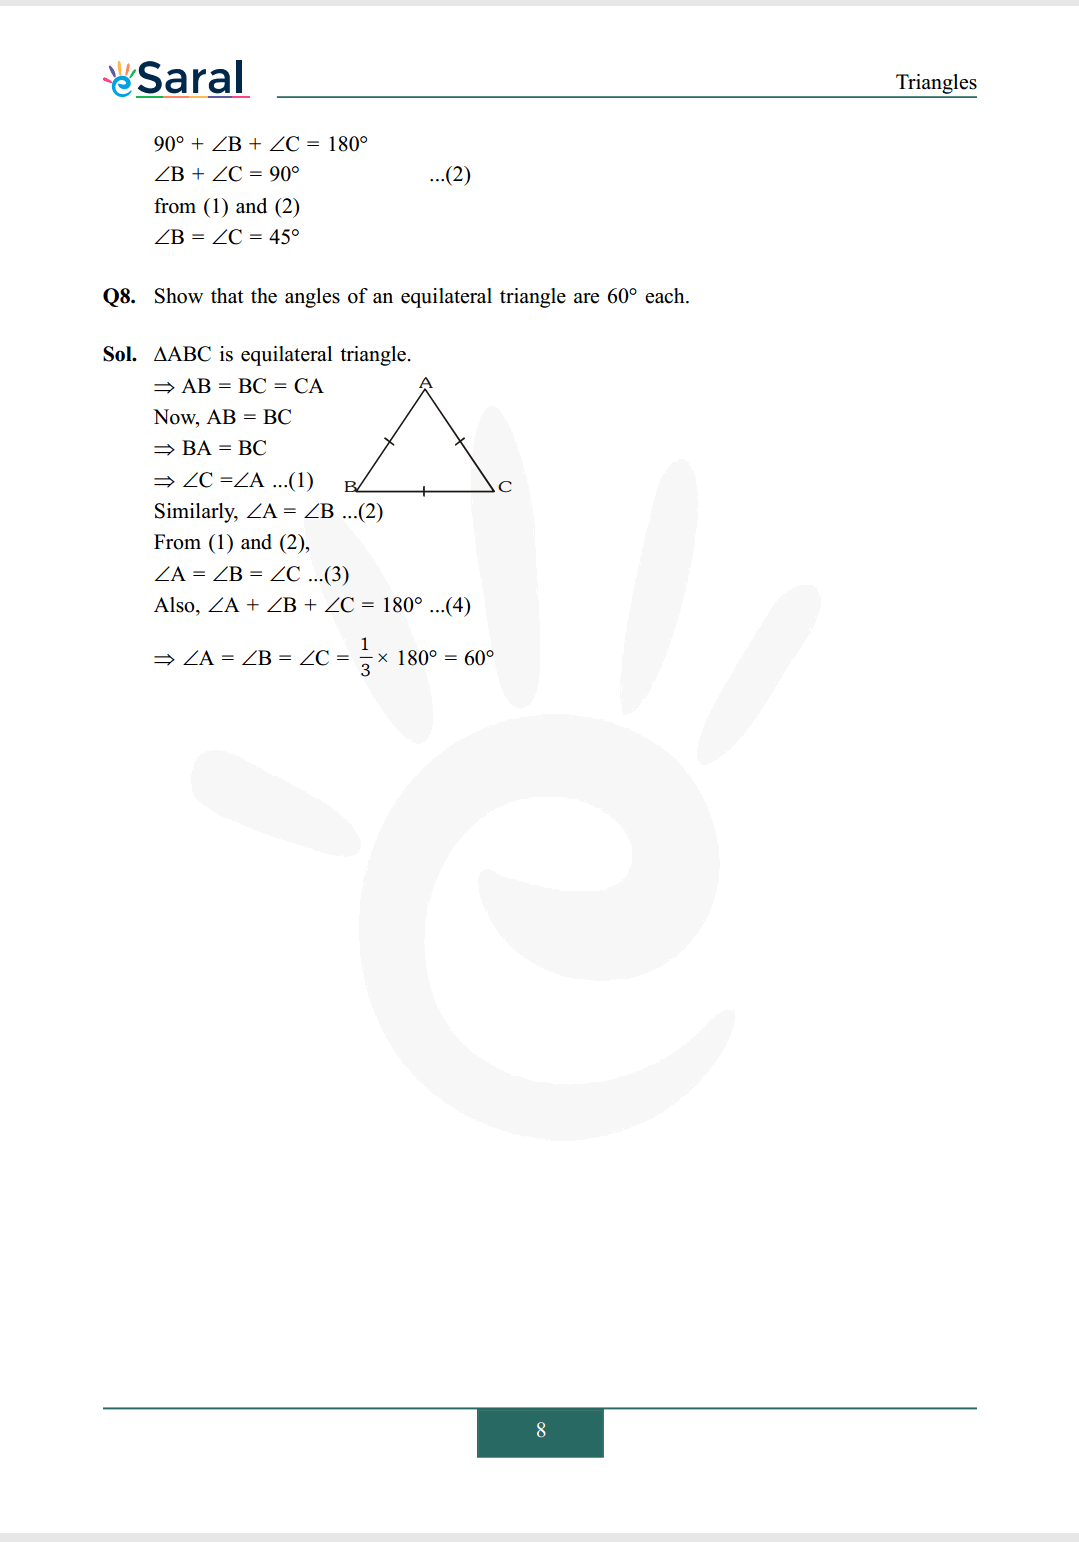 Class 9 maths chapter 7 exercise 7.2 solutions Image 4